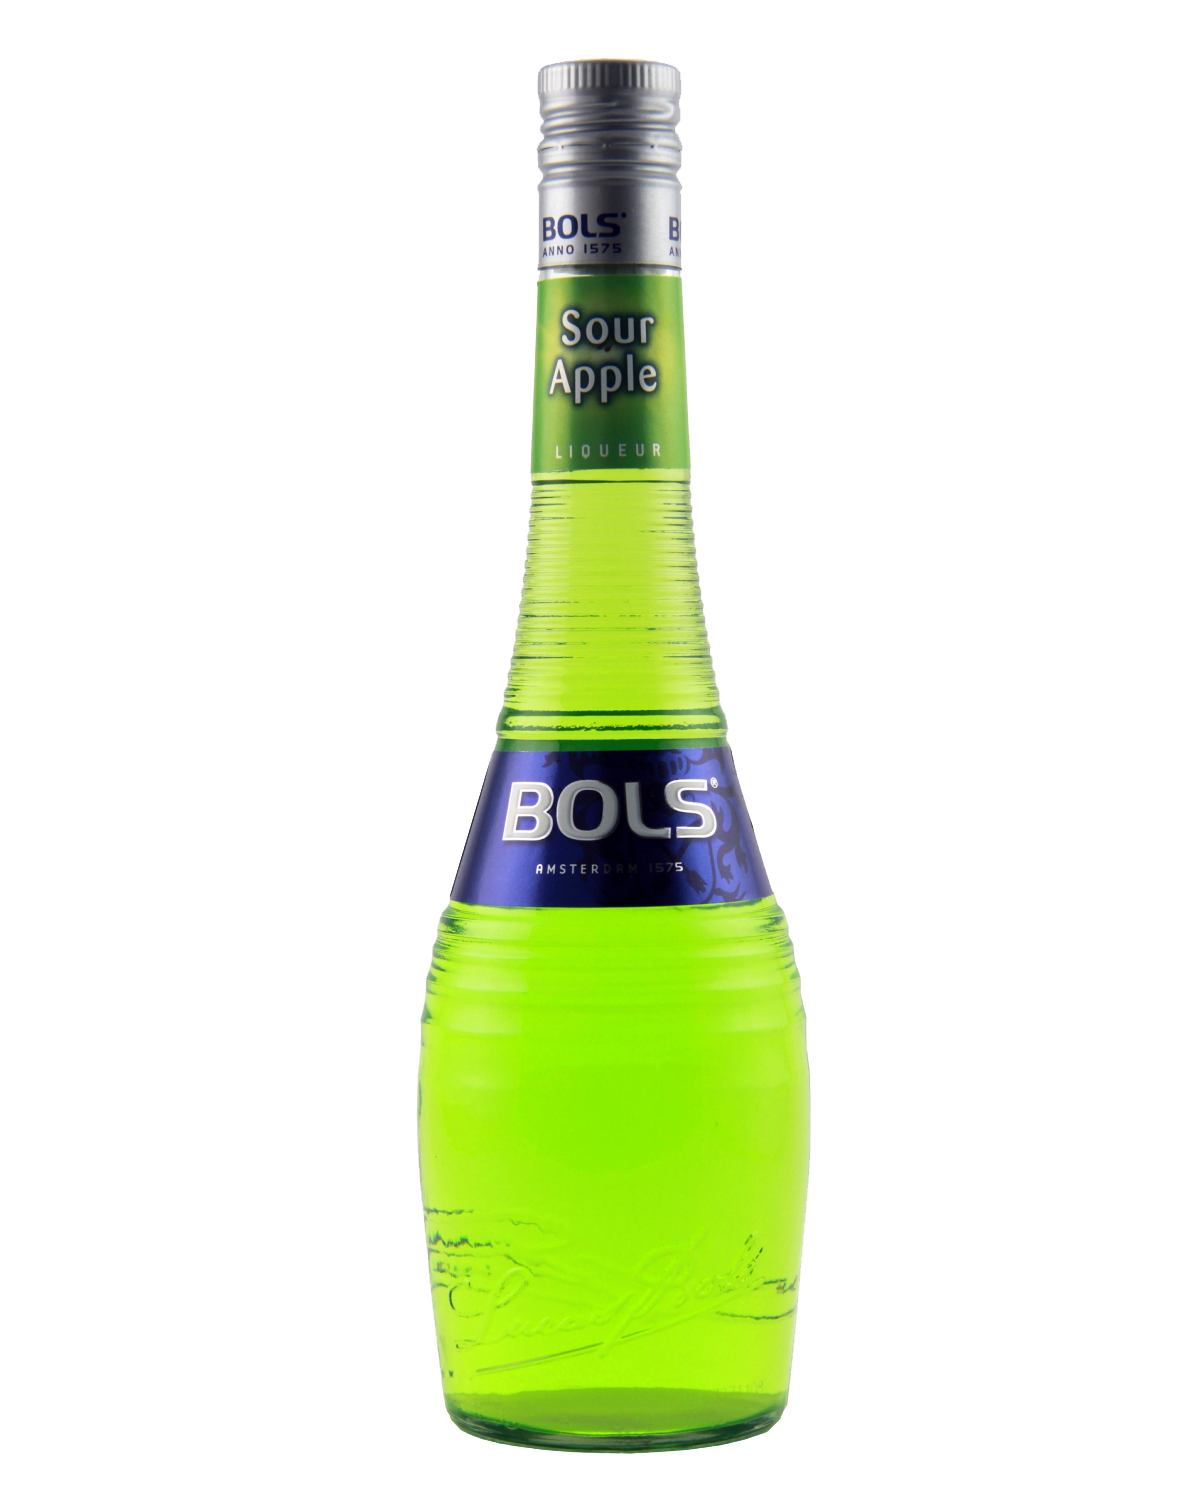 Bols Sour Apple Liqueur boasts crisp and tangy- green apples with subtle wo...